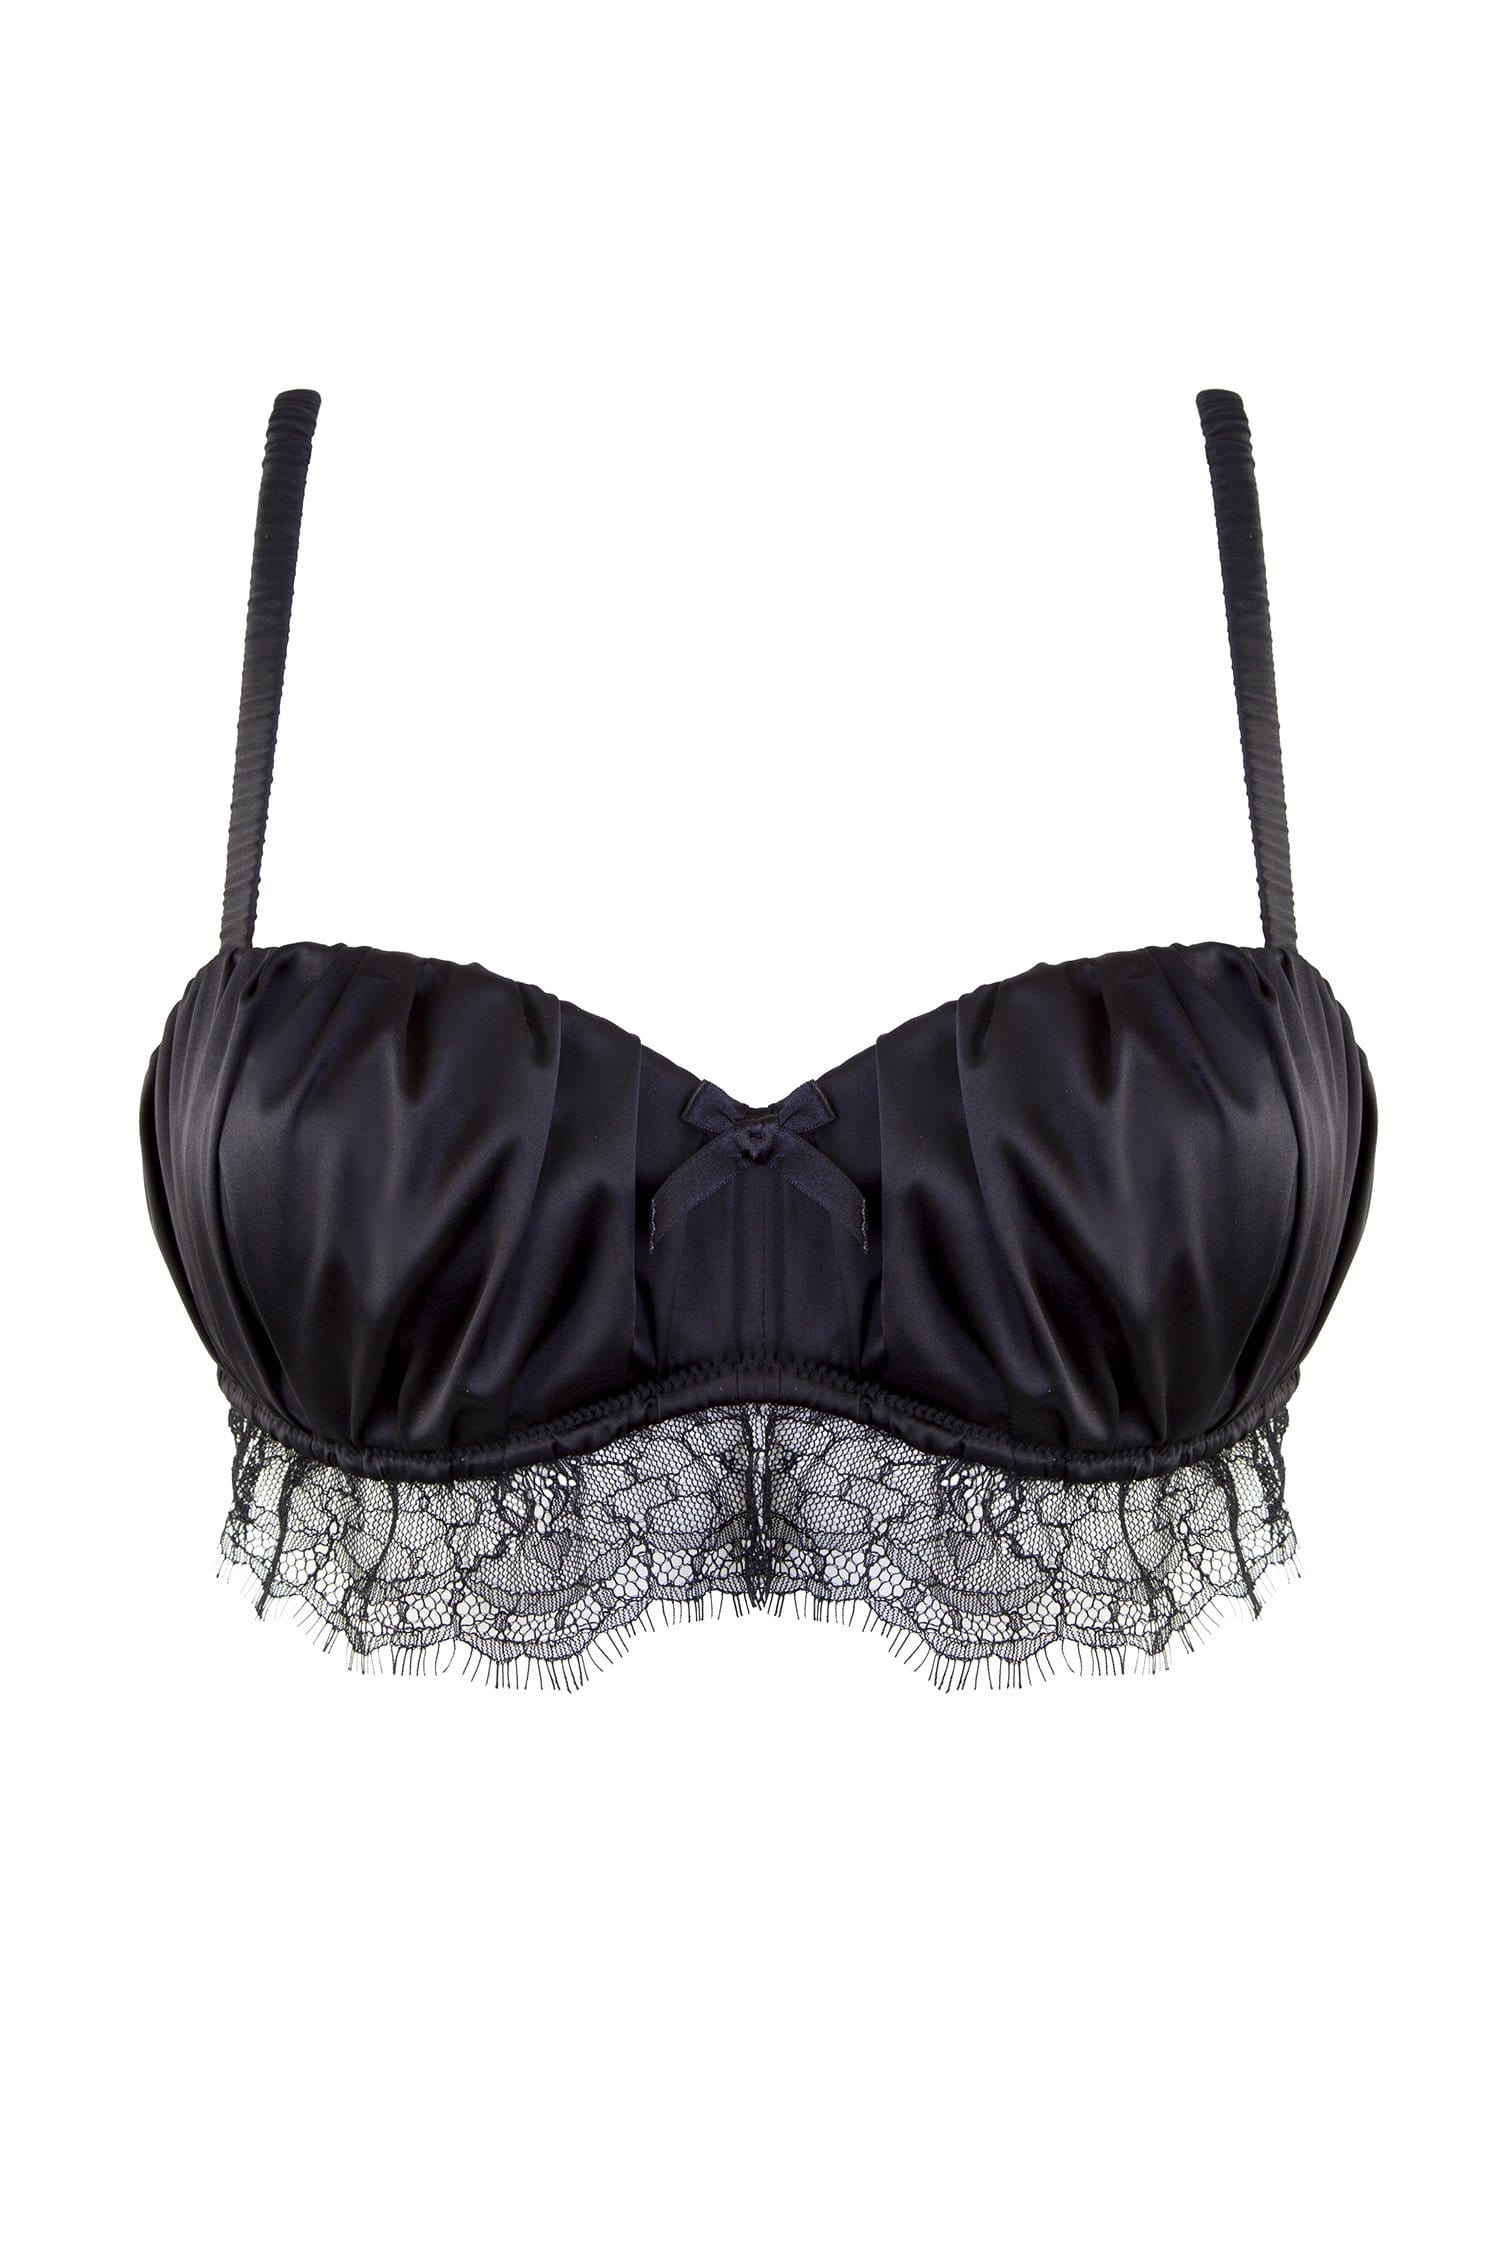 Isadora Ruched Bra Black A-D Cups